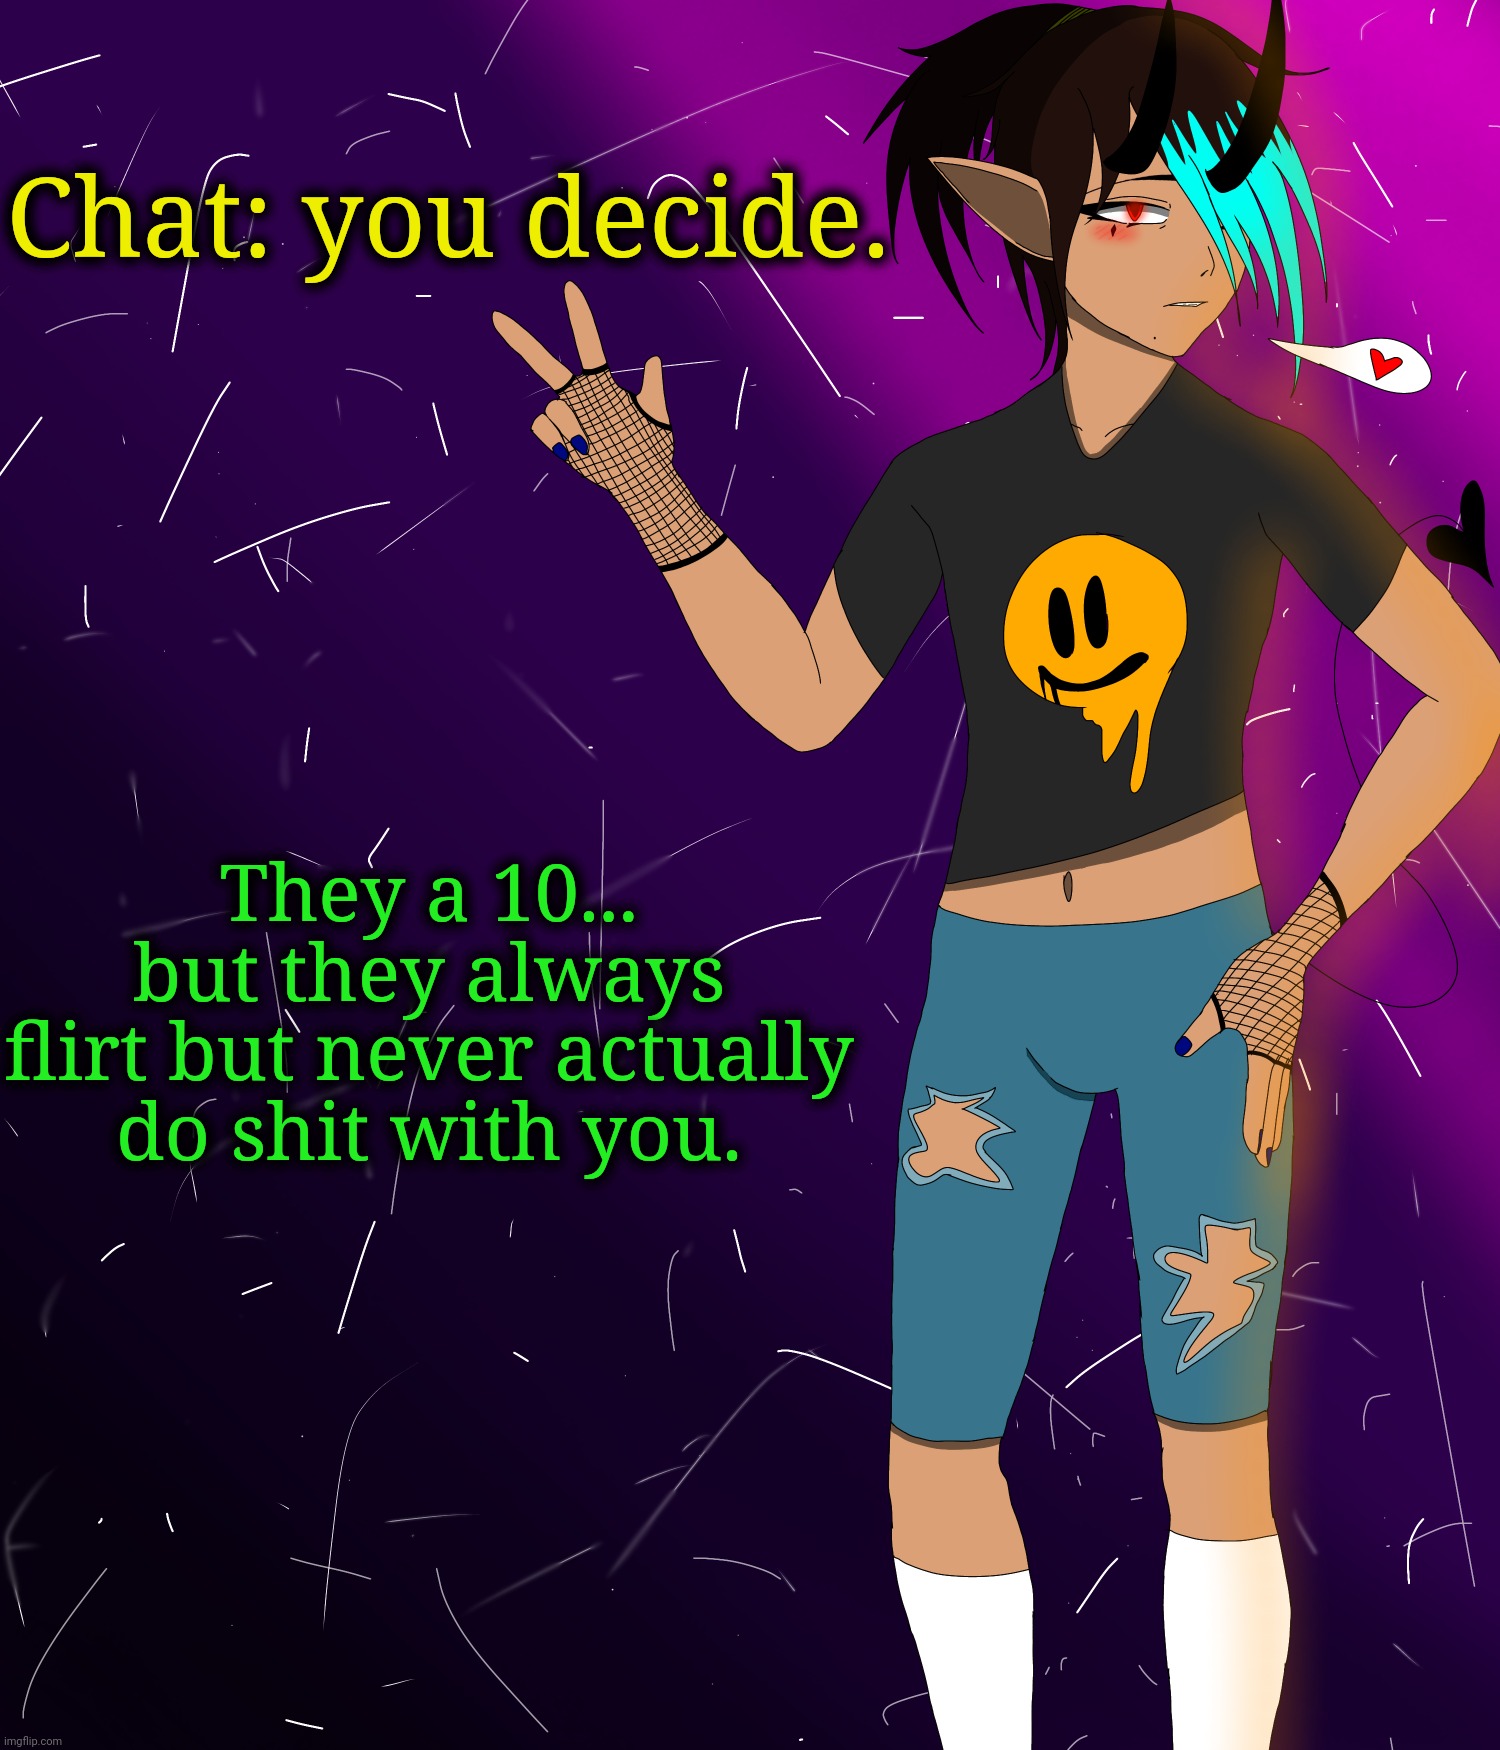 Spire jus chillin I guess | Chat: you decide. They a 10... but they always flirt but never actually do shit with you. | image tagged in spire jus chillin i guess | made w/ Imgflip meme maker